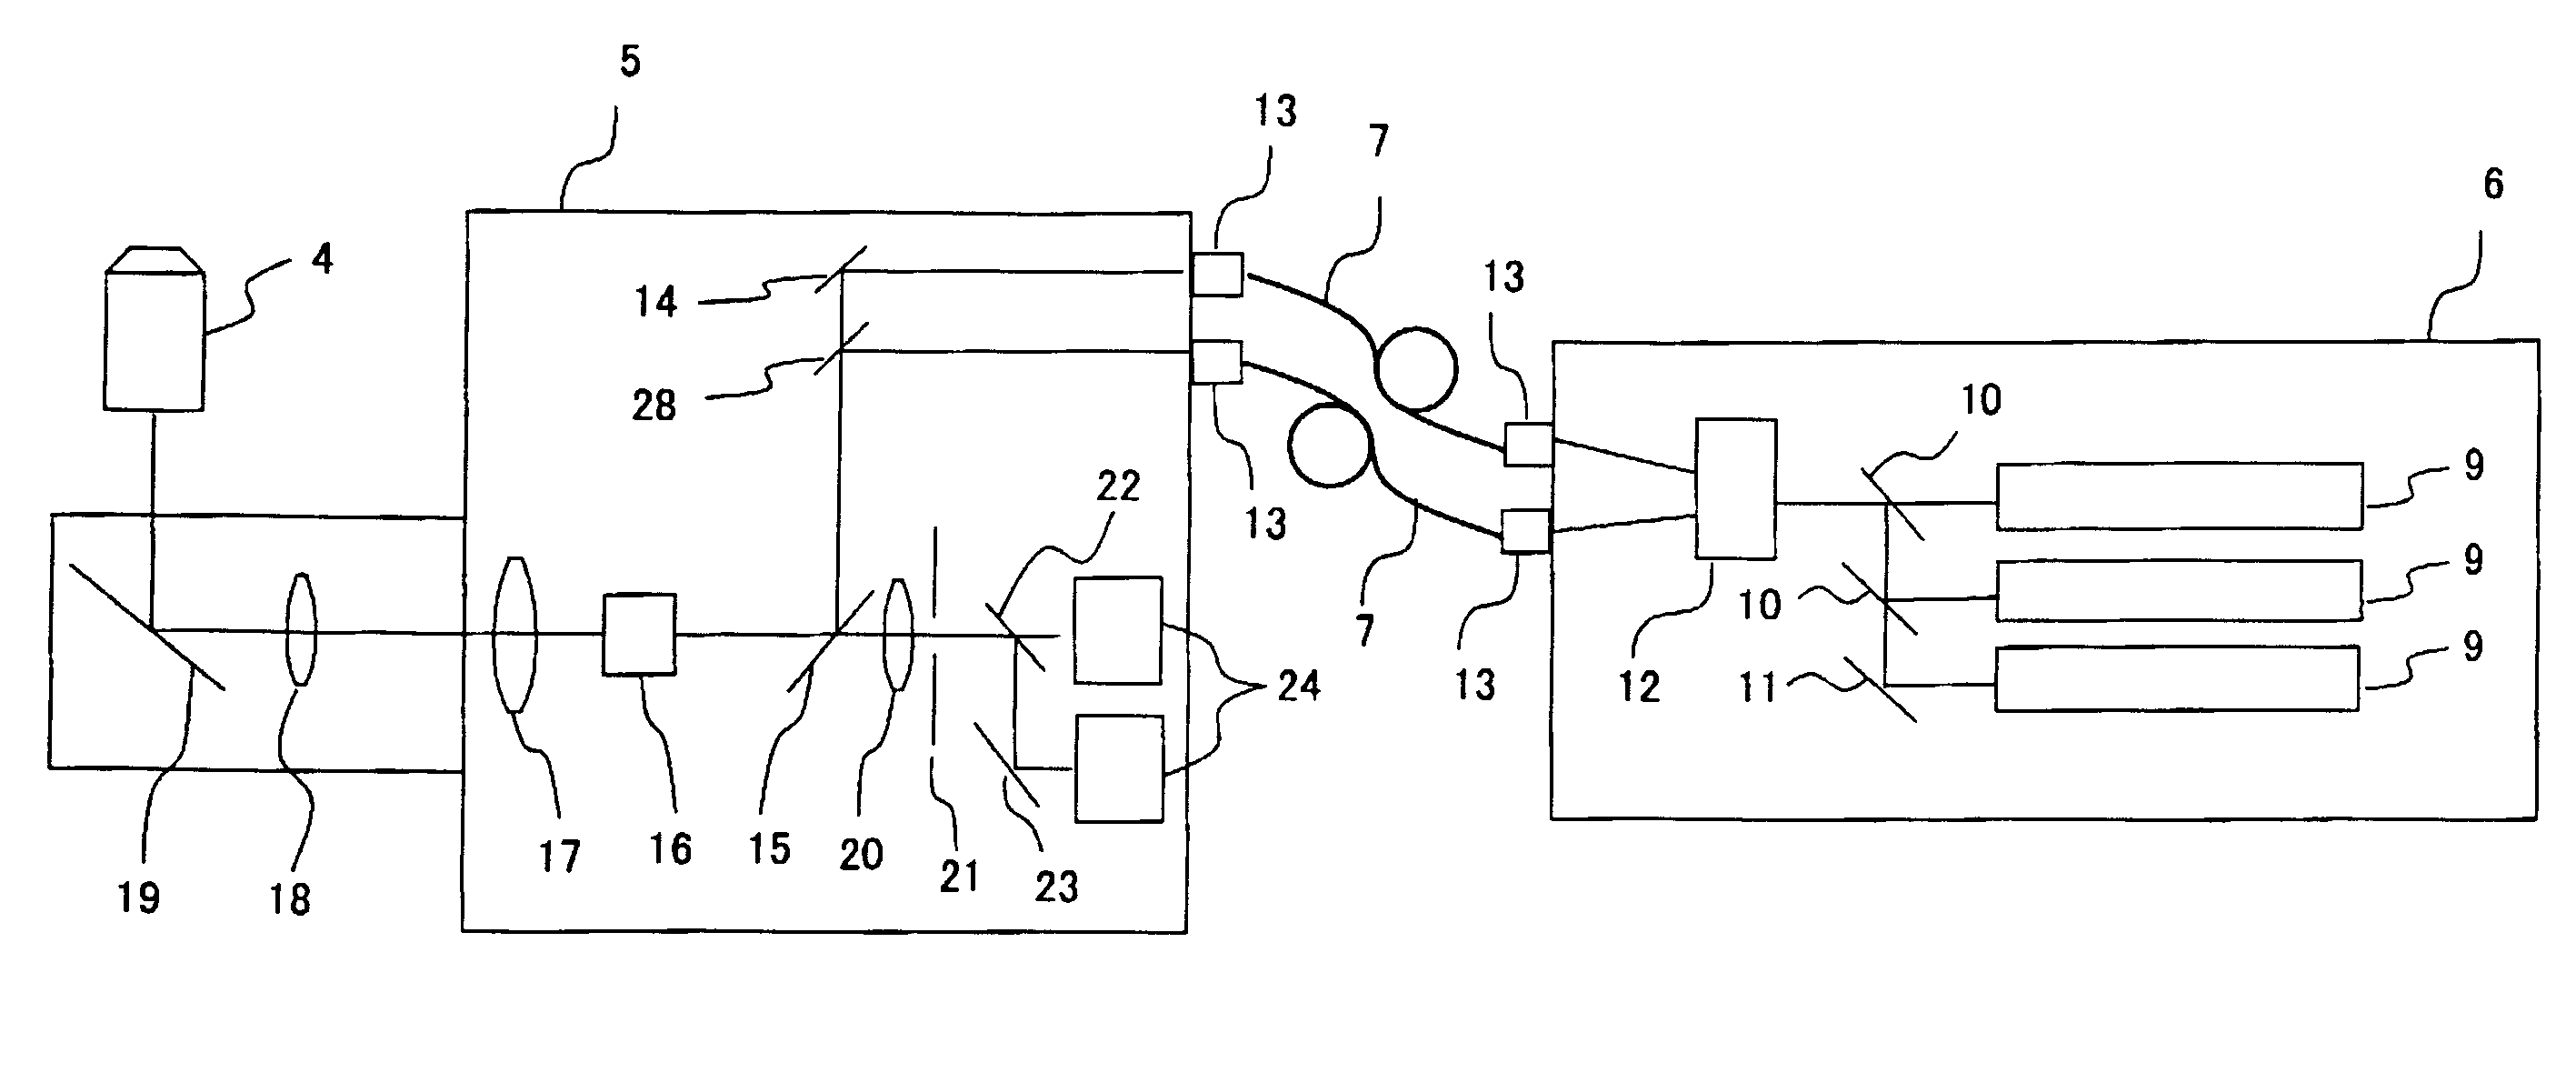 Laser scanning microscope and method of use